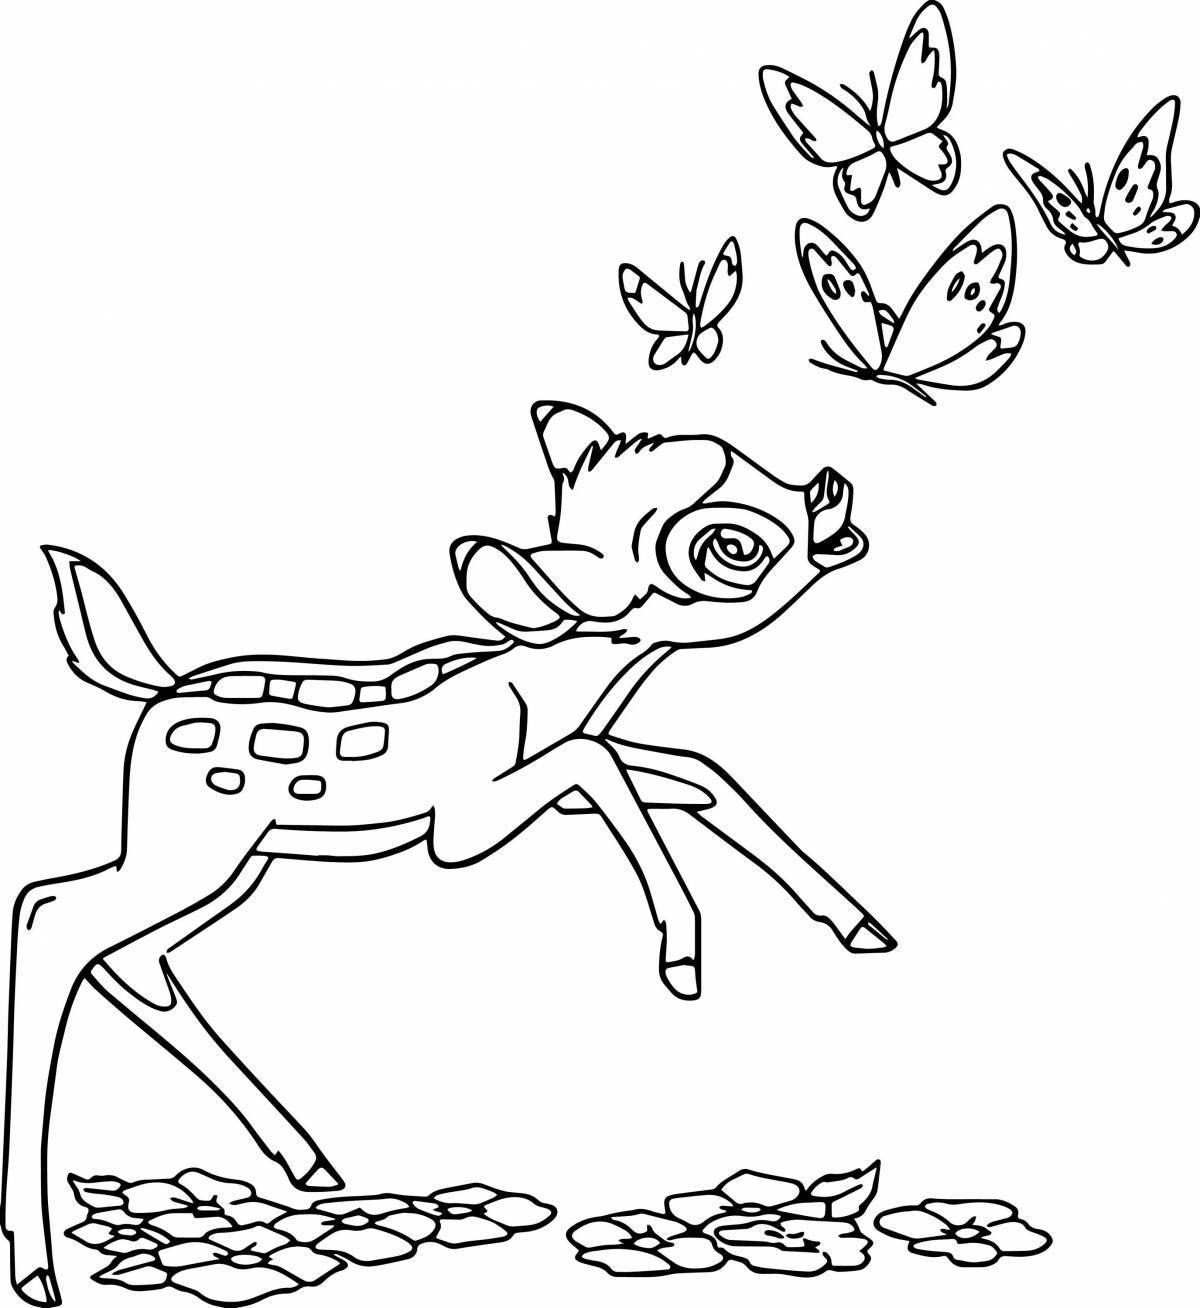 Bambi fawn live coloring